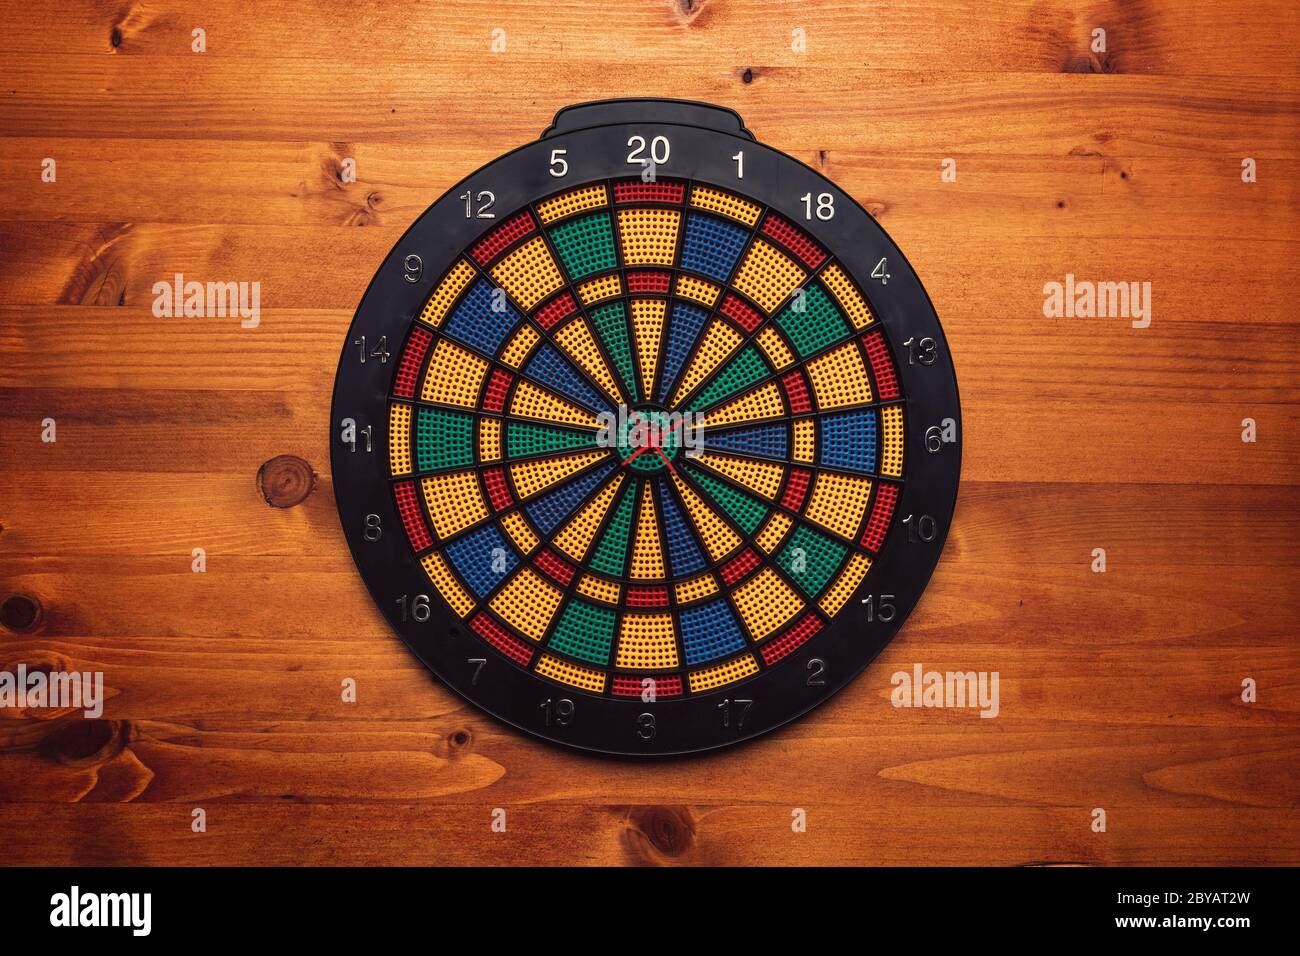 Dartboard, colorful surface of dart game equipment Stock Photo